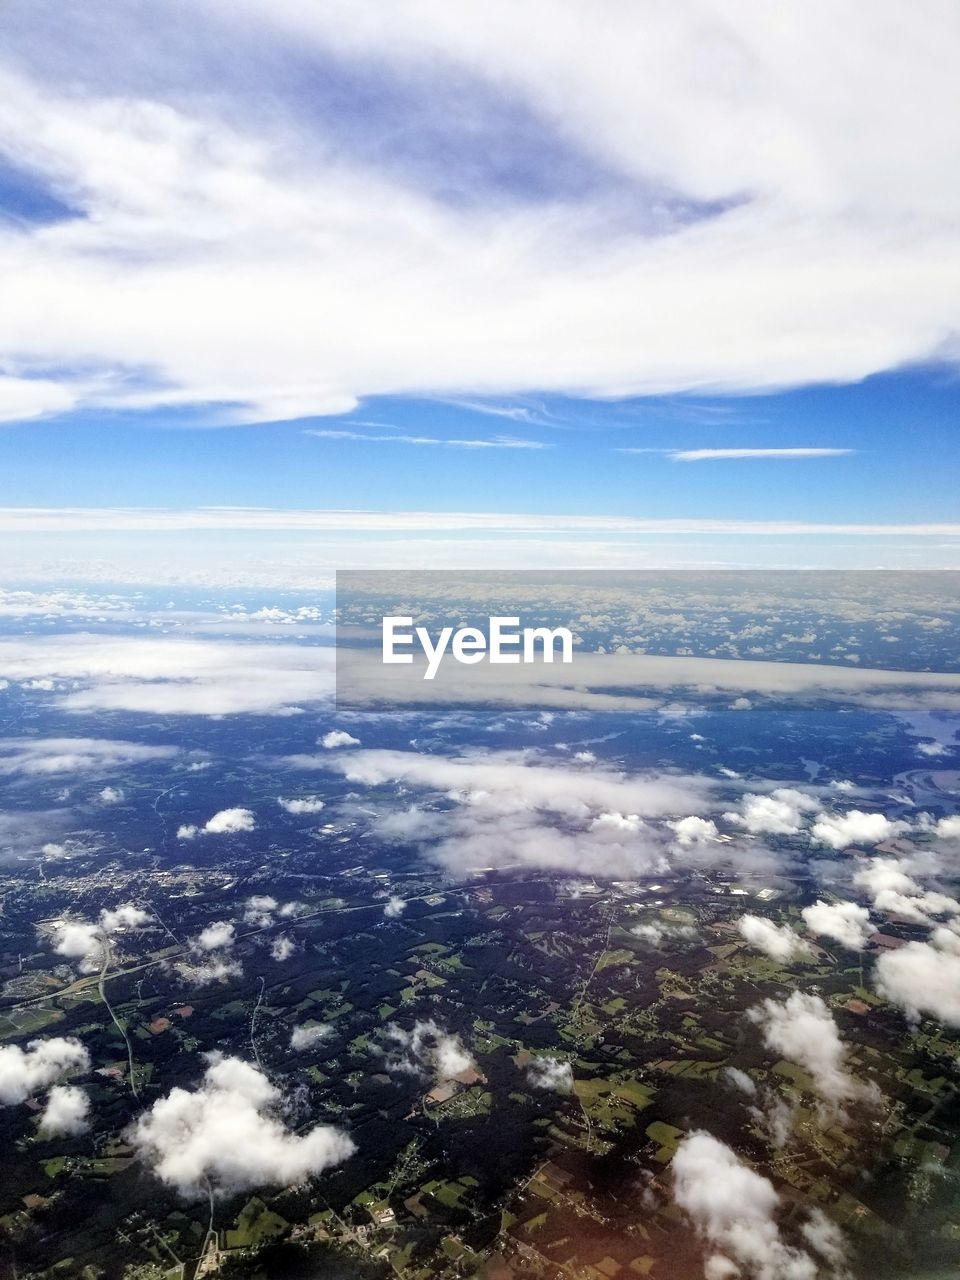 AERIAL VIEW OF LANDSCAPE AGAINST CLOUDY SKY